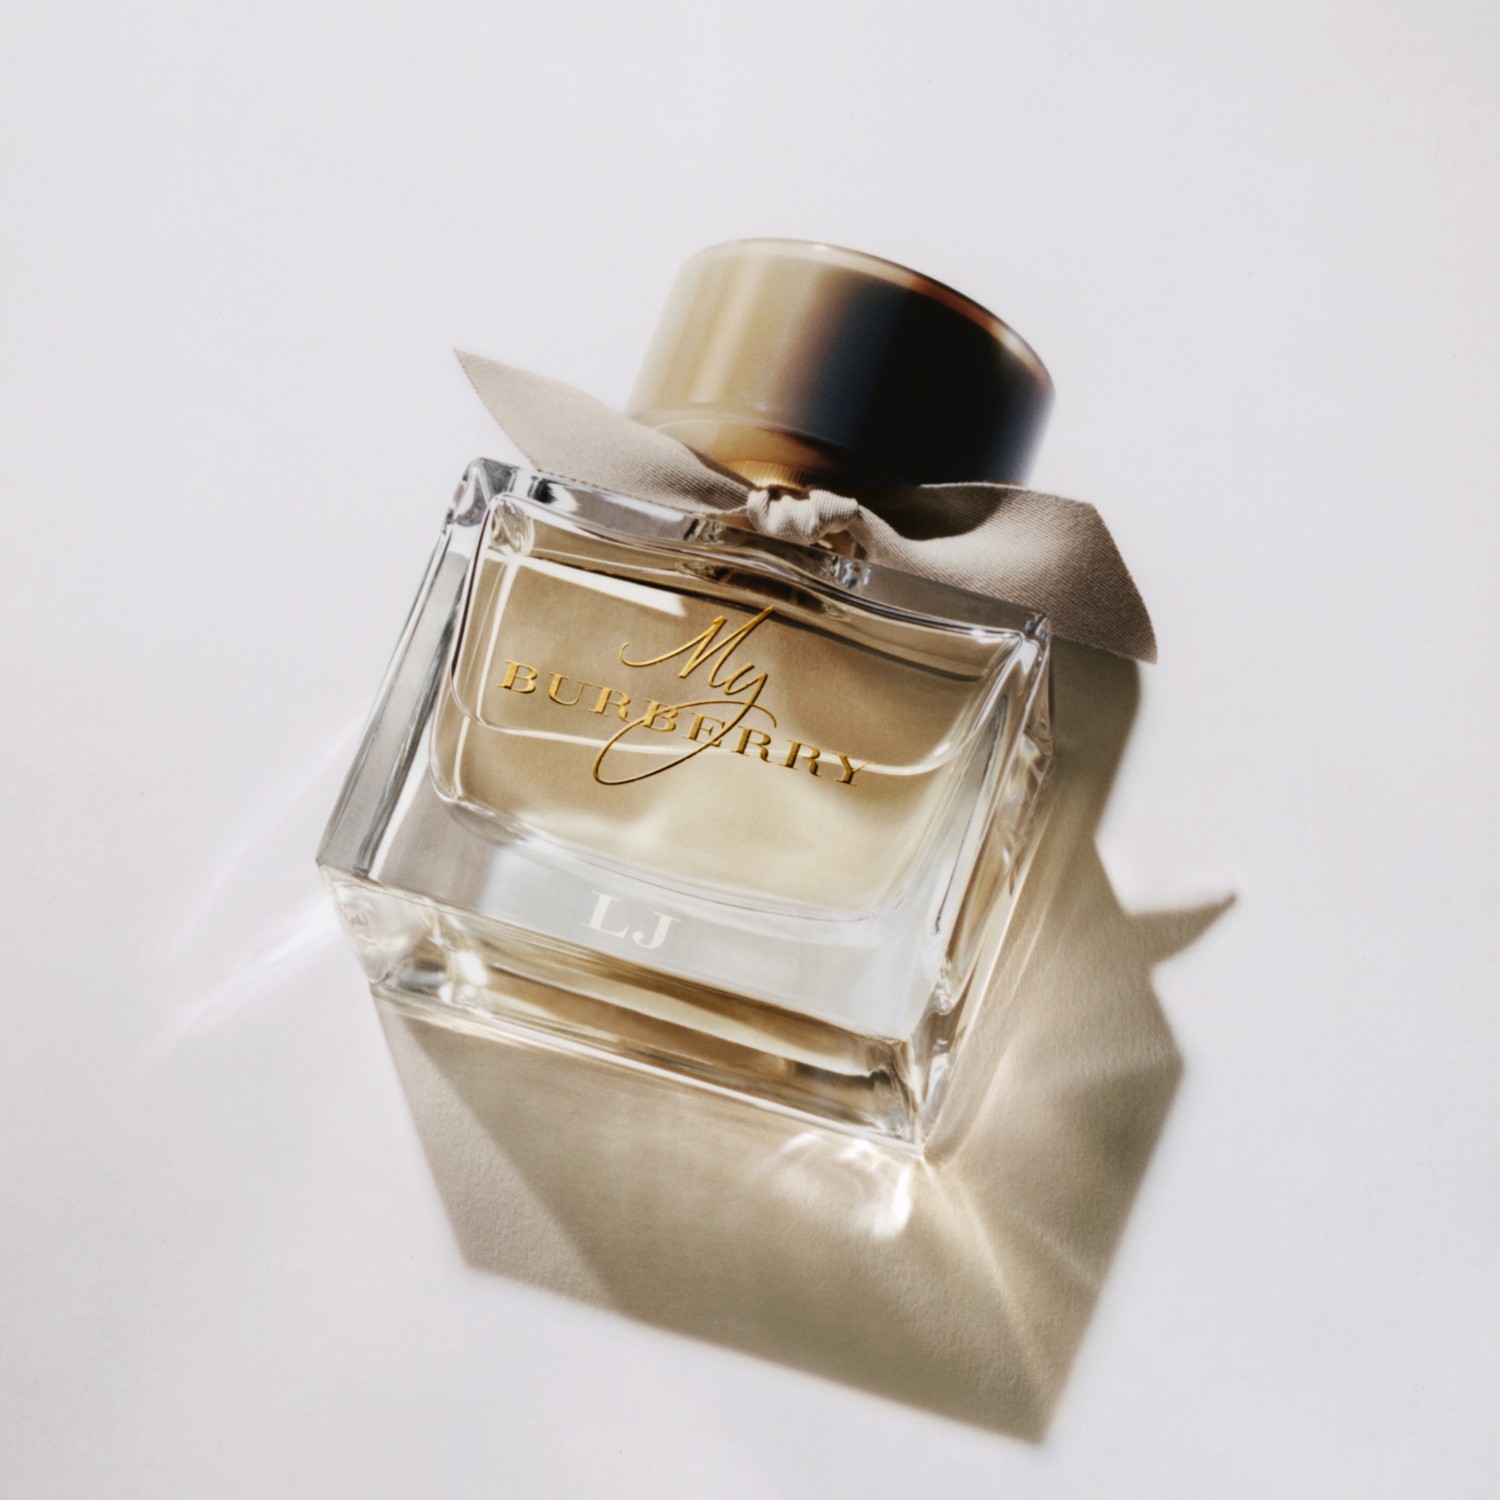 My Burberry Fragrance | Burberry United States